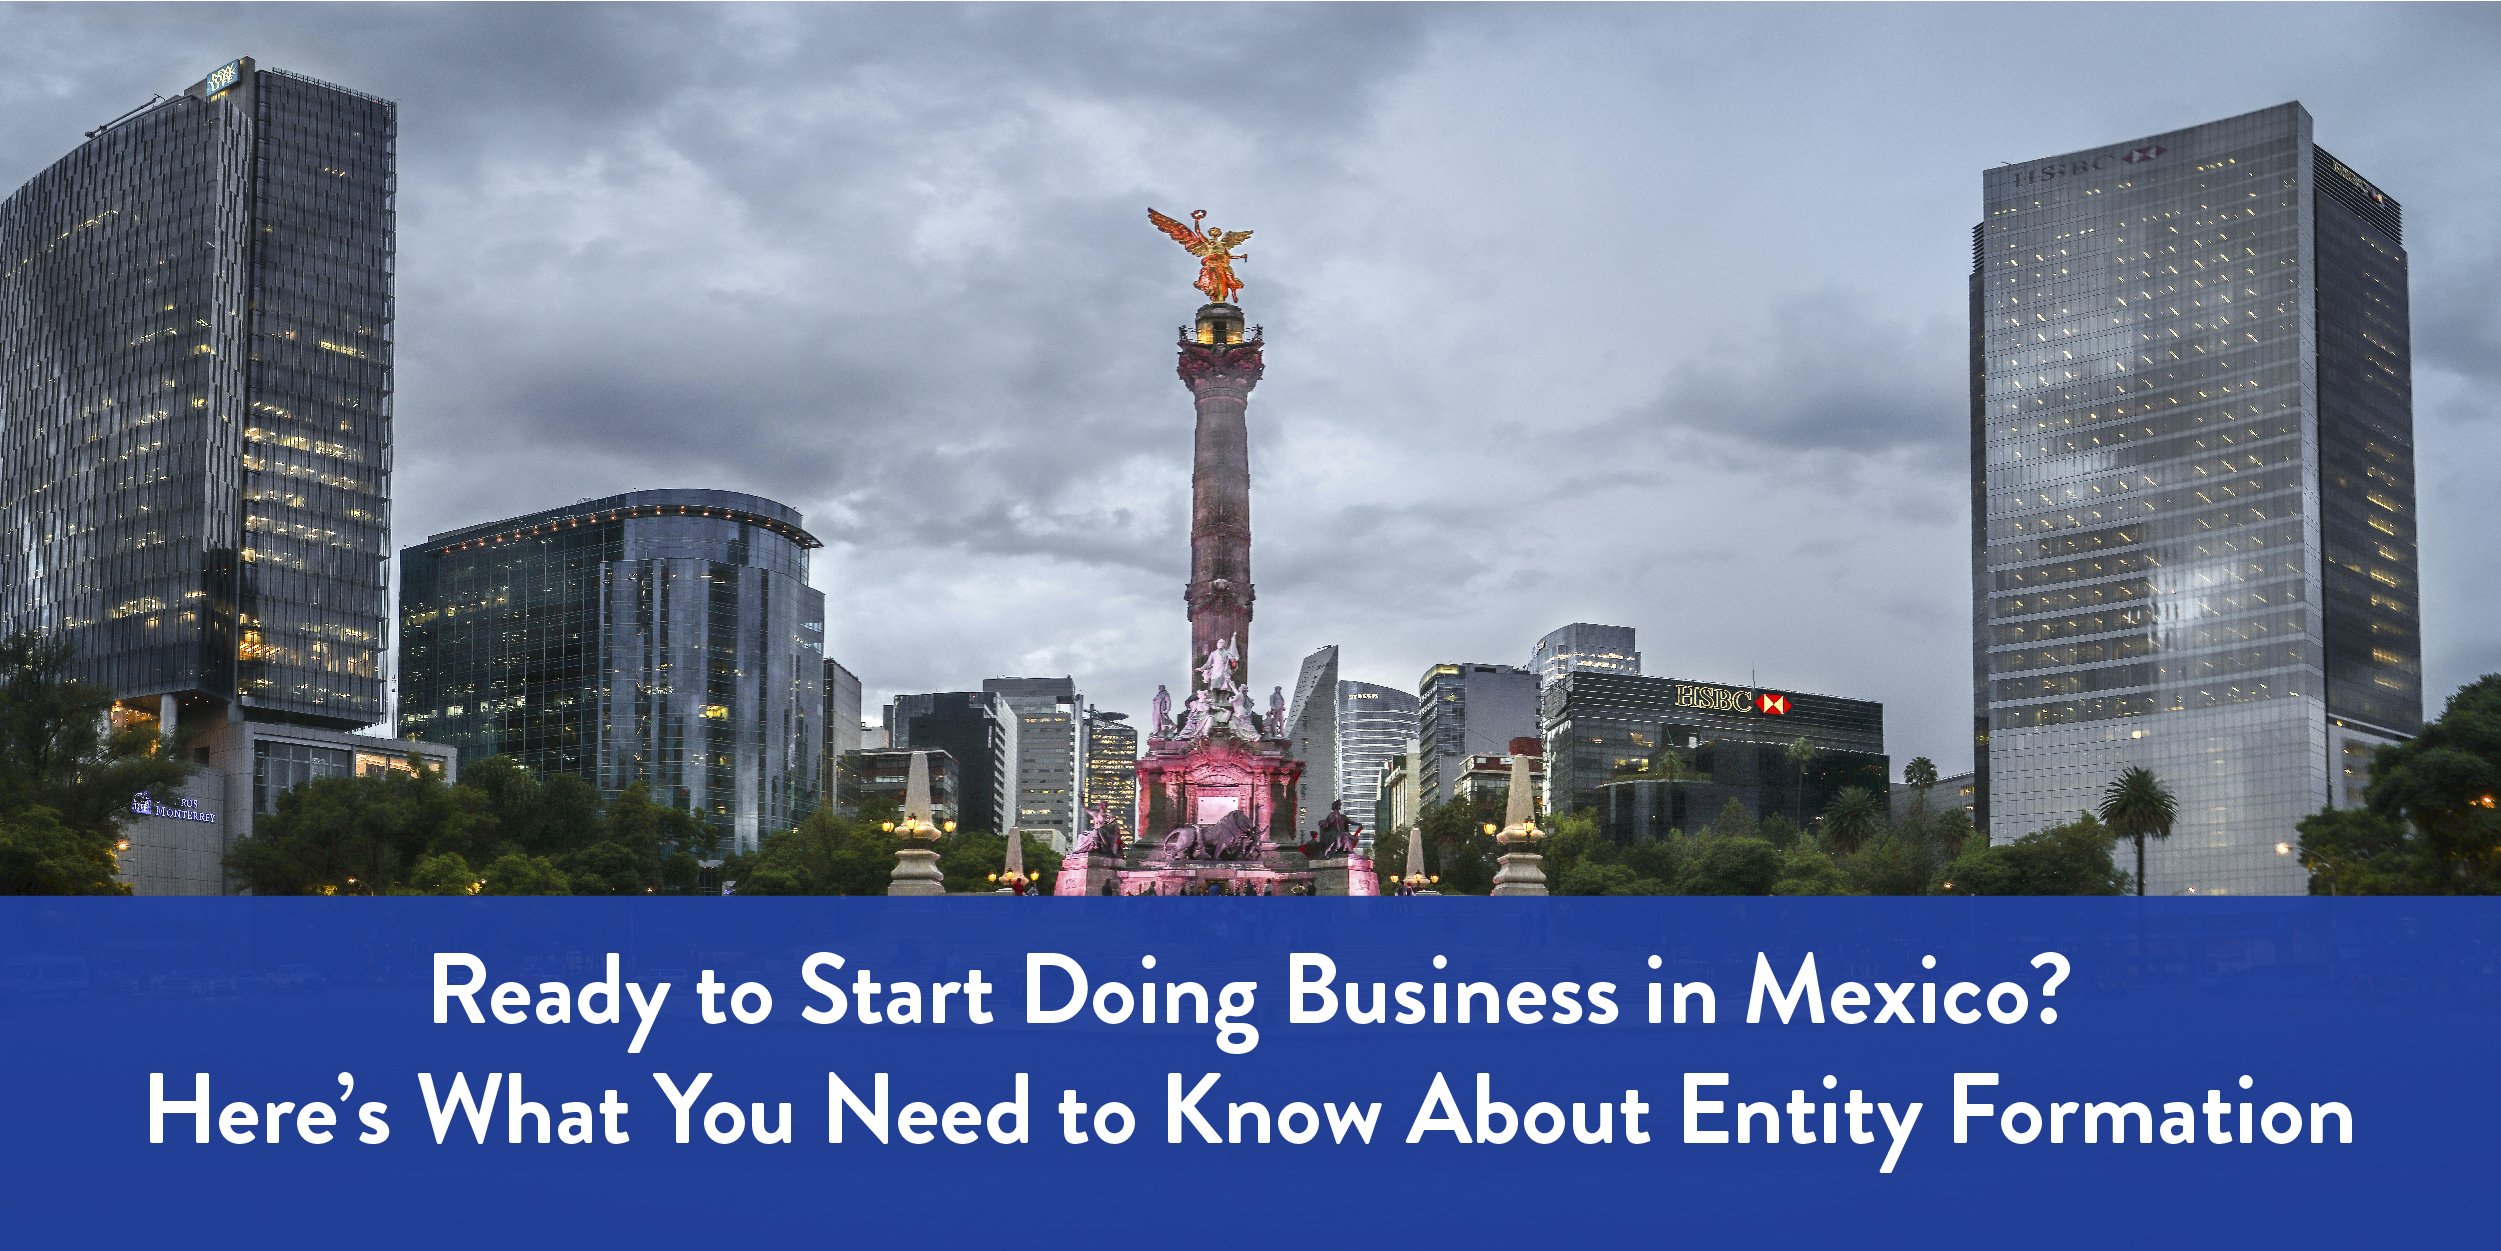 Ready to Start Doing Business in Mexico? Here’s What You Need to Know